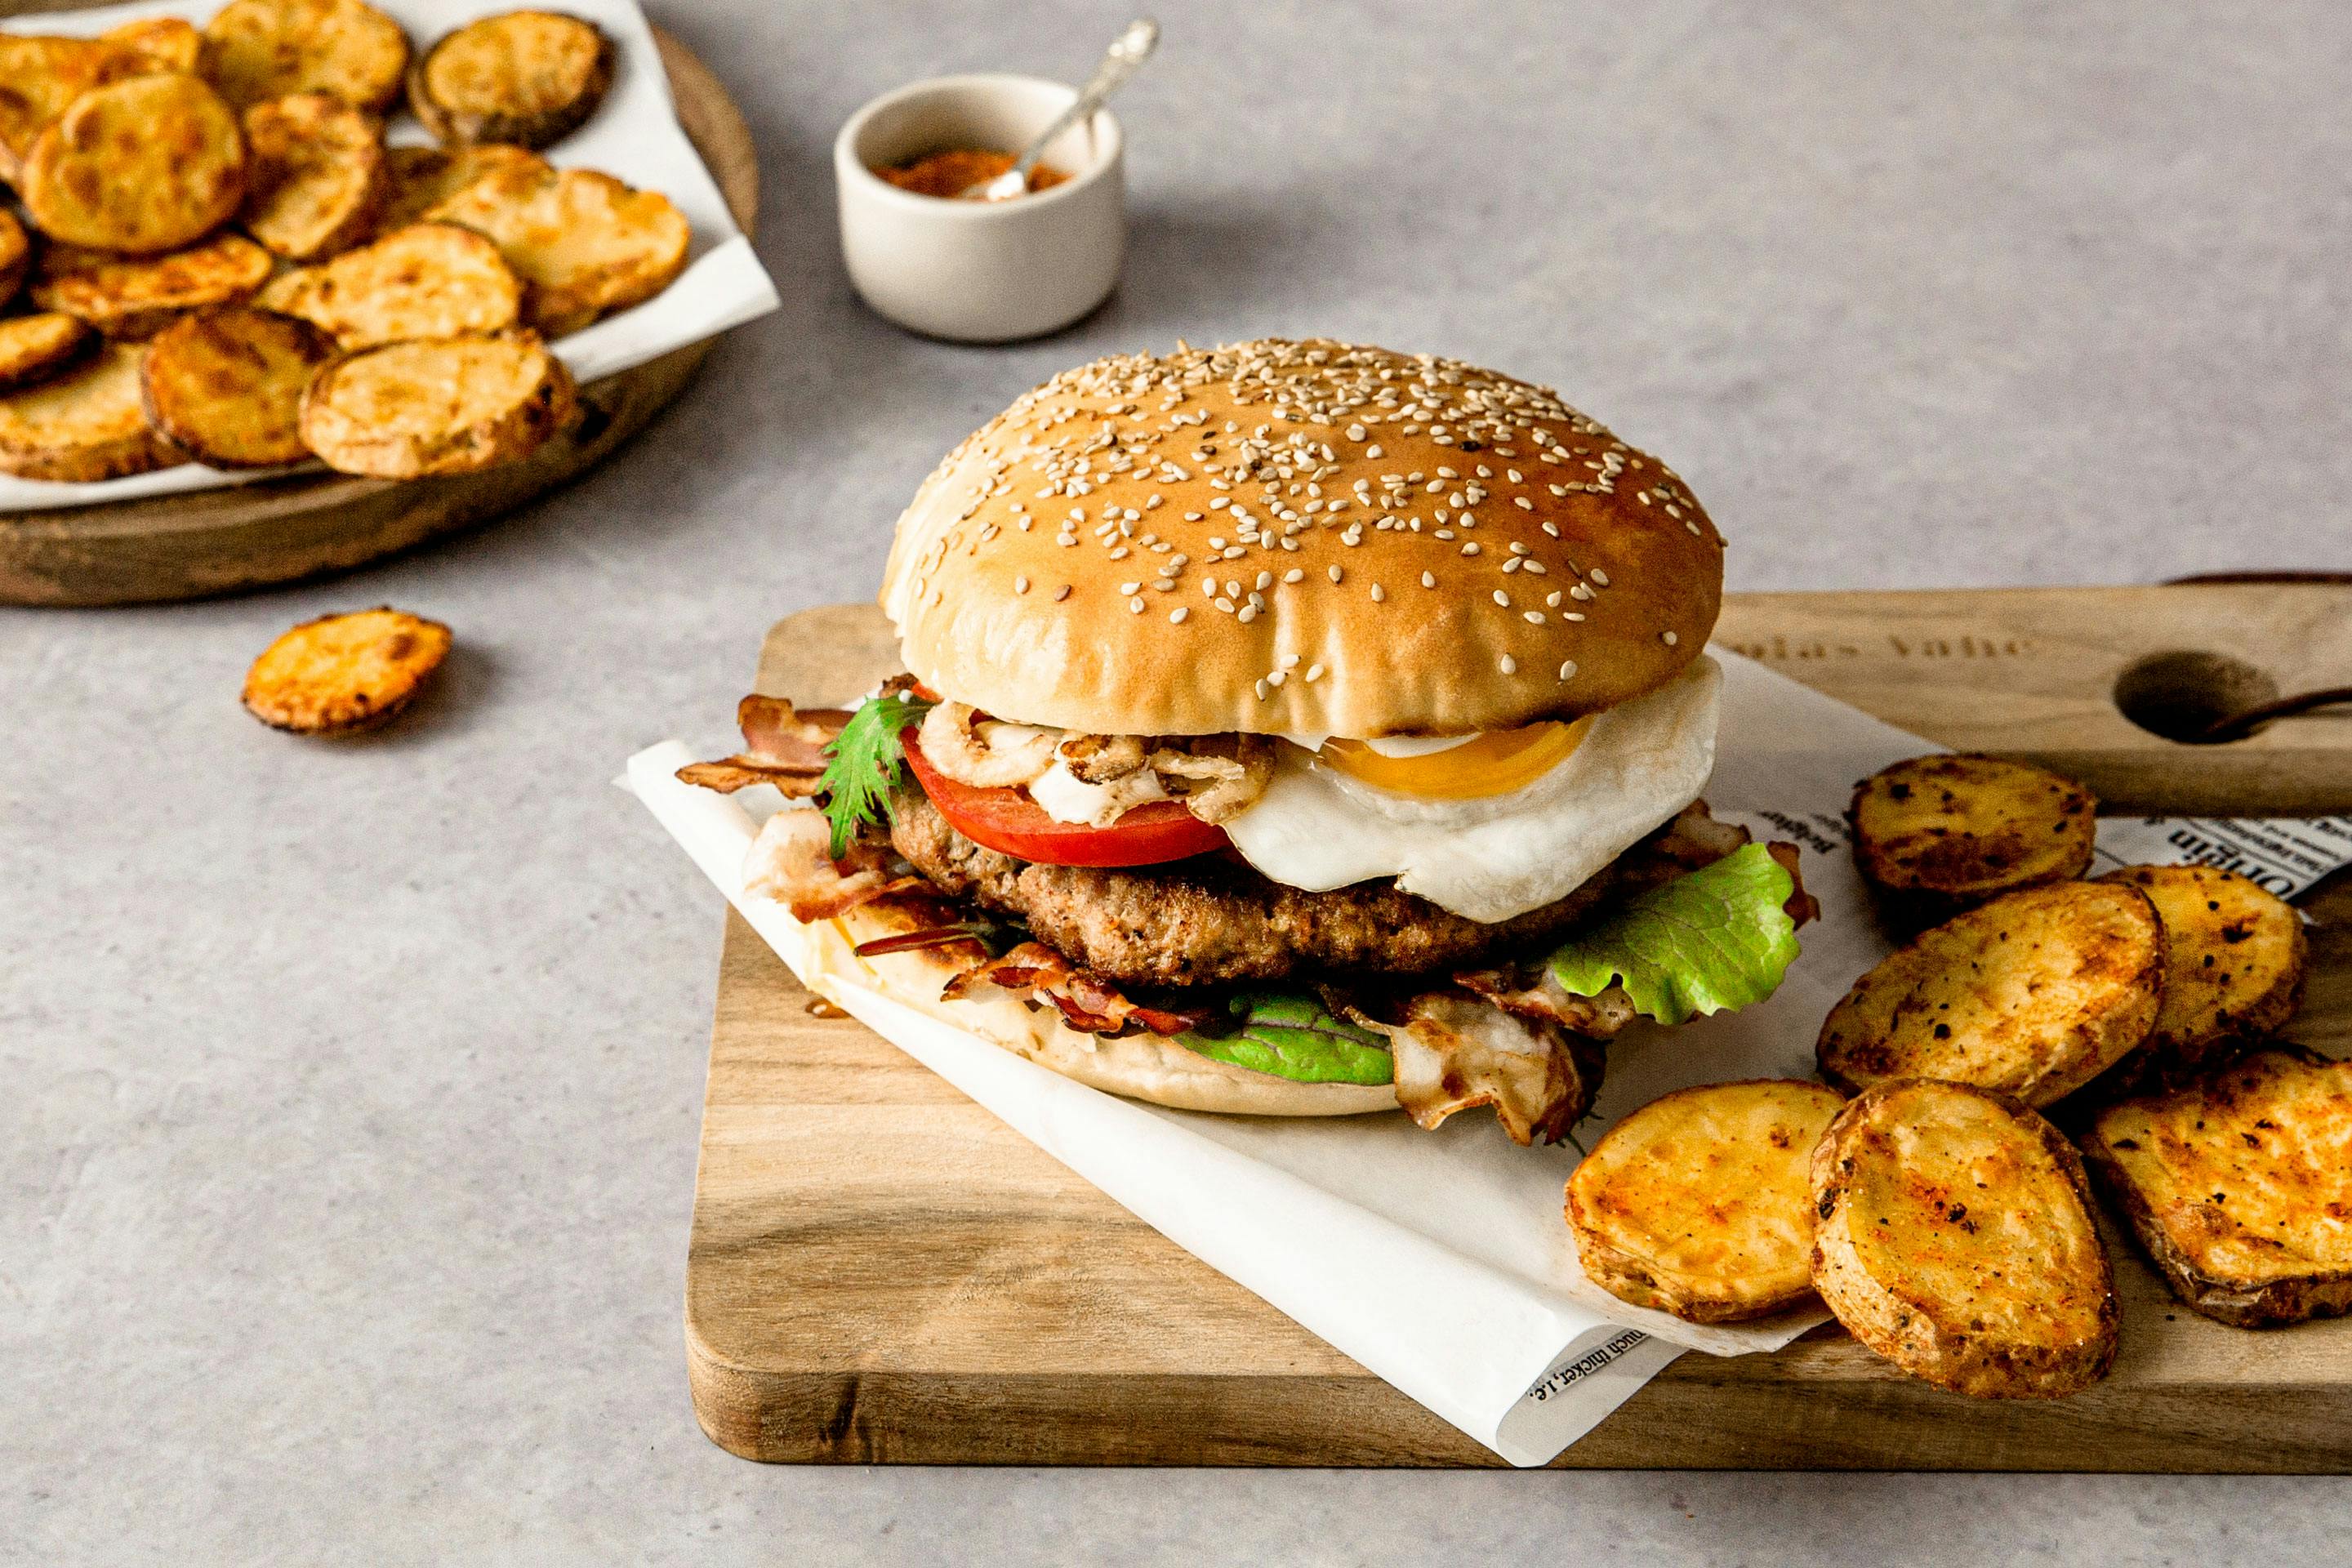 Spicy potatoes with western burger with egg arranged on a board